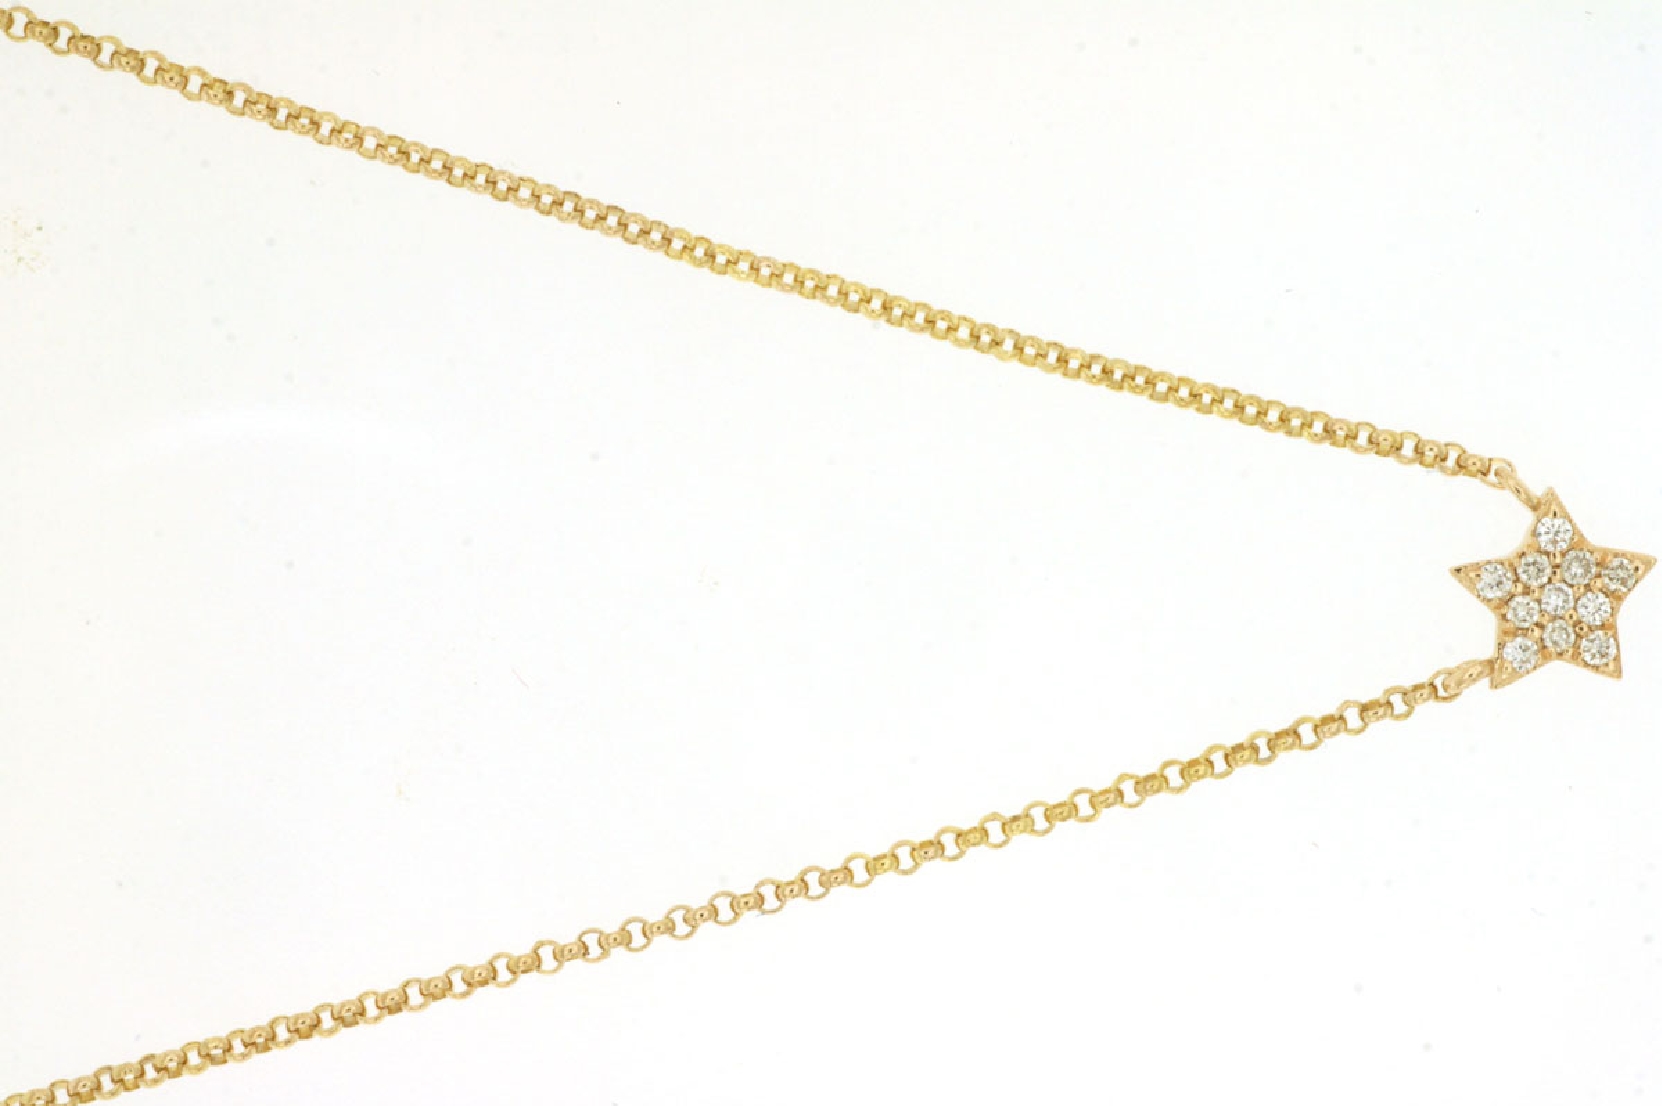 14K Yellow Gold Diamond Star Necklace
0.05ct
16 Inches